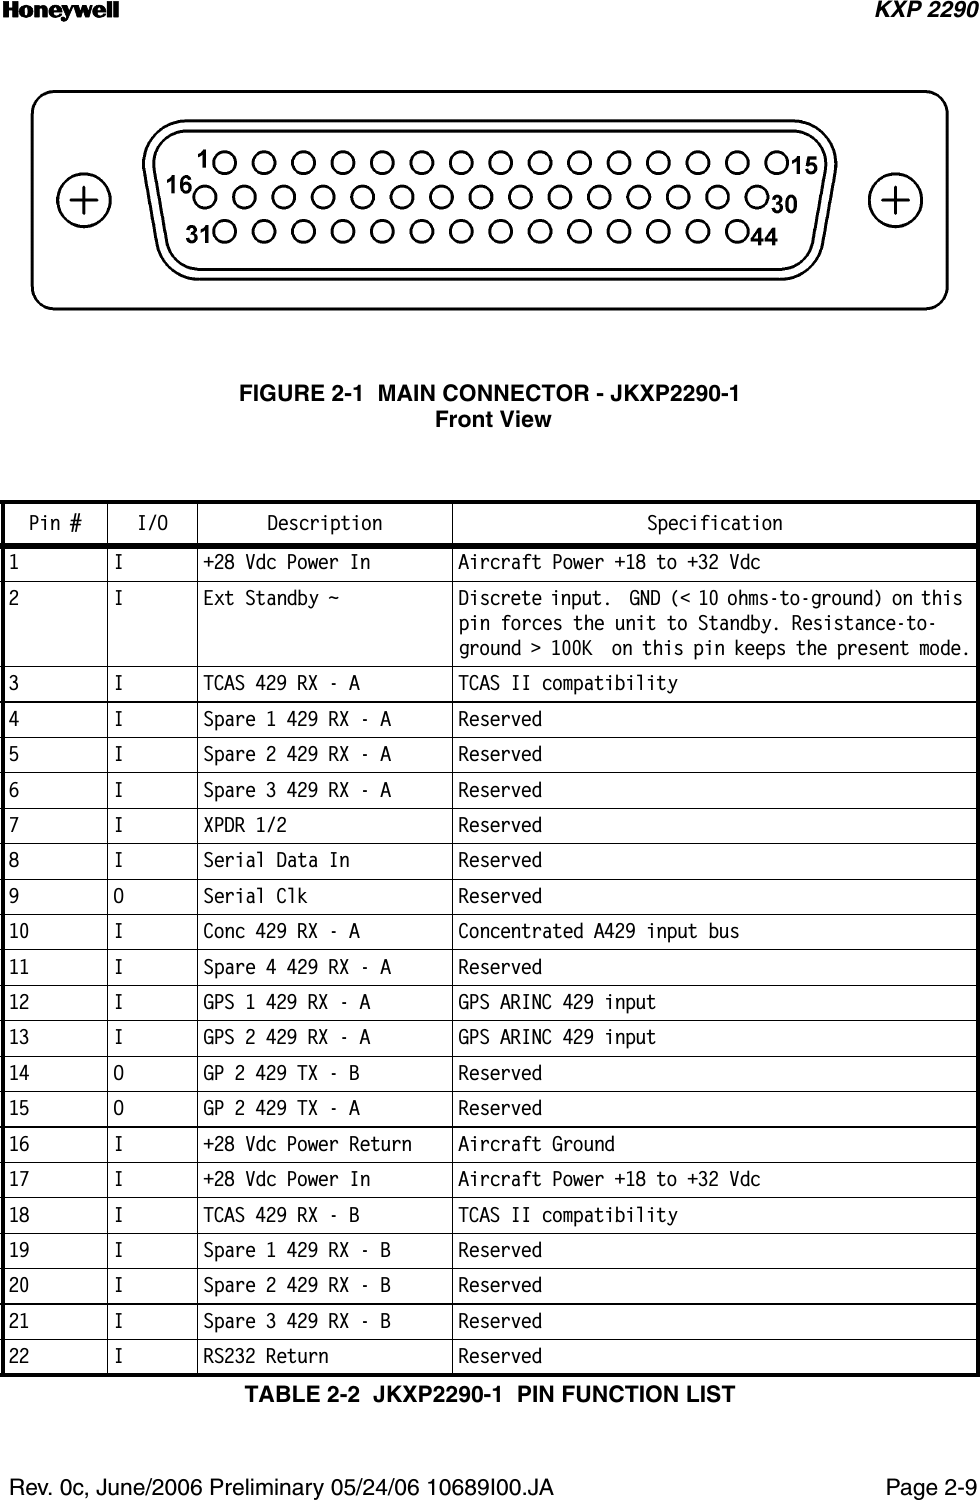 n KXP 2290 Rev. 0c, June/2006 Preliminary 05/24/06 10689I00.JA Page 2-9FIGURE 2-1  MAIN CONNECTOR - JKXP2290-1 Front ViewPin # I/O Description Specification1 I +28 Vdc Power In Aircraft Power +18 to +32 Vdc2 I Ext Standby ~  Discrete input.  GND (&lt; 10 ohms-to-ground) on this pin forces the unit to Standby. Resistance-to-ground &gt; 100K  on this pin keeps the present mode.3 I TCAS 429 RX - A TCAS II compatibility4 I Spare 1 429 RX - A Reserved5 I Spare 2 429 RX - A Reserved6 I Spare 3 429 RX - A Reserved7 I XPDR 1/2 Reserved8 I Serial Data In Reserved9 O Serial Clk Reserved10 I Conc 429 RX - A Concentrated A429 input bus11 I Spare 4 429 RX - A Reserved12 I GPS 1 429 RX - A GPS ARINC 429 input13 I GPS 2 429 RX - A GPS ARINC 429 input14 O GP 2 429 TX - B Reserved15 O GP 2 429 TX - A Reserved16 I +28 Vdc Power Return Aircraft Ground17 I +28 Vdc Power In Aircraft Power +18 to +32 Vdc18 I TCAS 429 RX - B TCAS II compatibility19 I Spare 1 429 RX - B Reserved20 I Spare 2 429 RX - B Reserved21 I Spare 3 429 RX - B Reserved22 I RS232 Return ReservedTABLE 2-2  JKXP2290-1  PIN FUNCTION LIST 